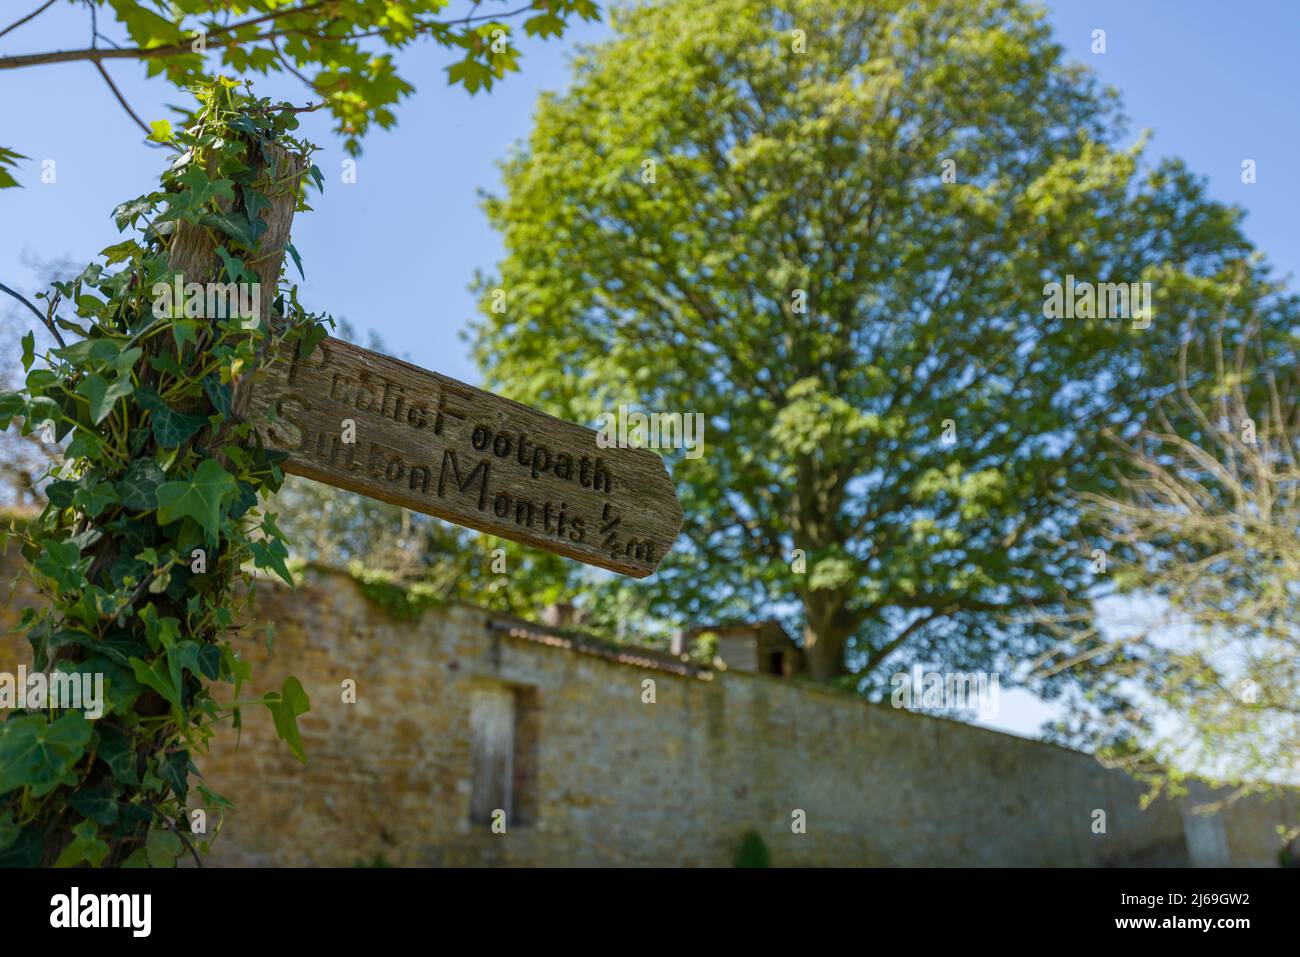 A public footpath signpost to the village pf Sutton Montis, Somerset, England. Stock Photo